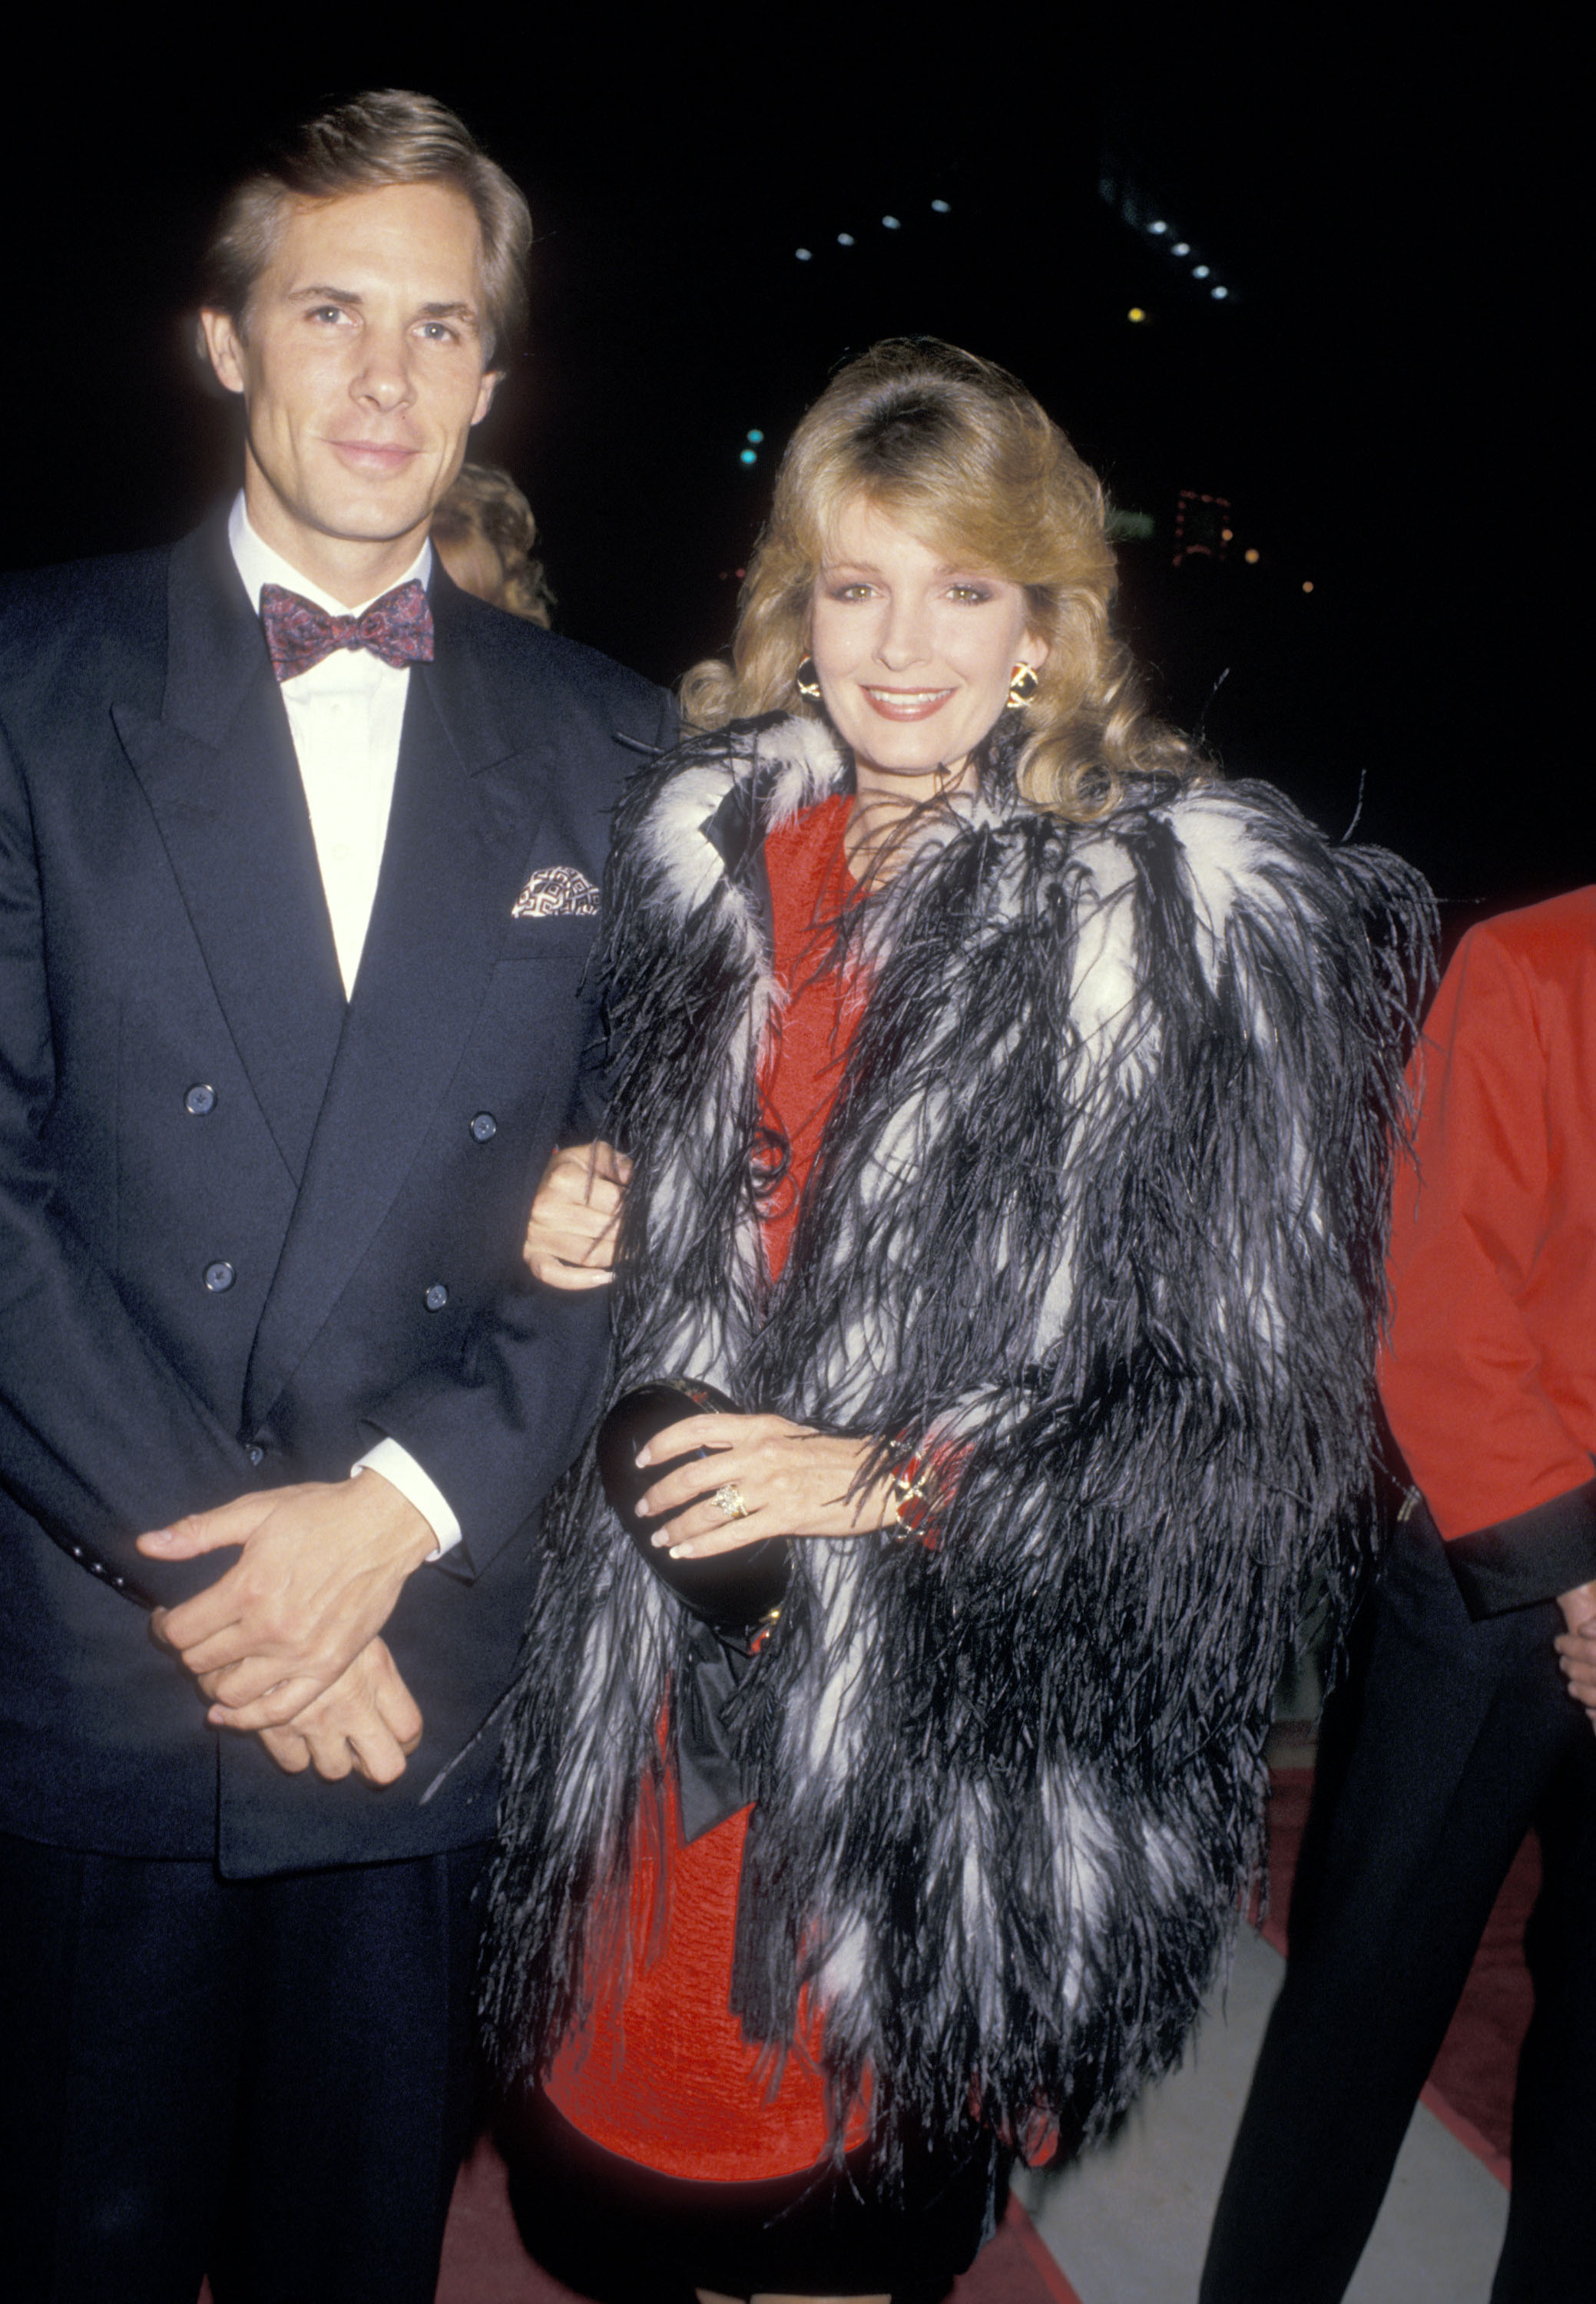 Deidre Hall and Michael Dubelko on November 18, 1987, in Century City, California. | Source: Getty Images